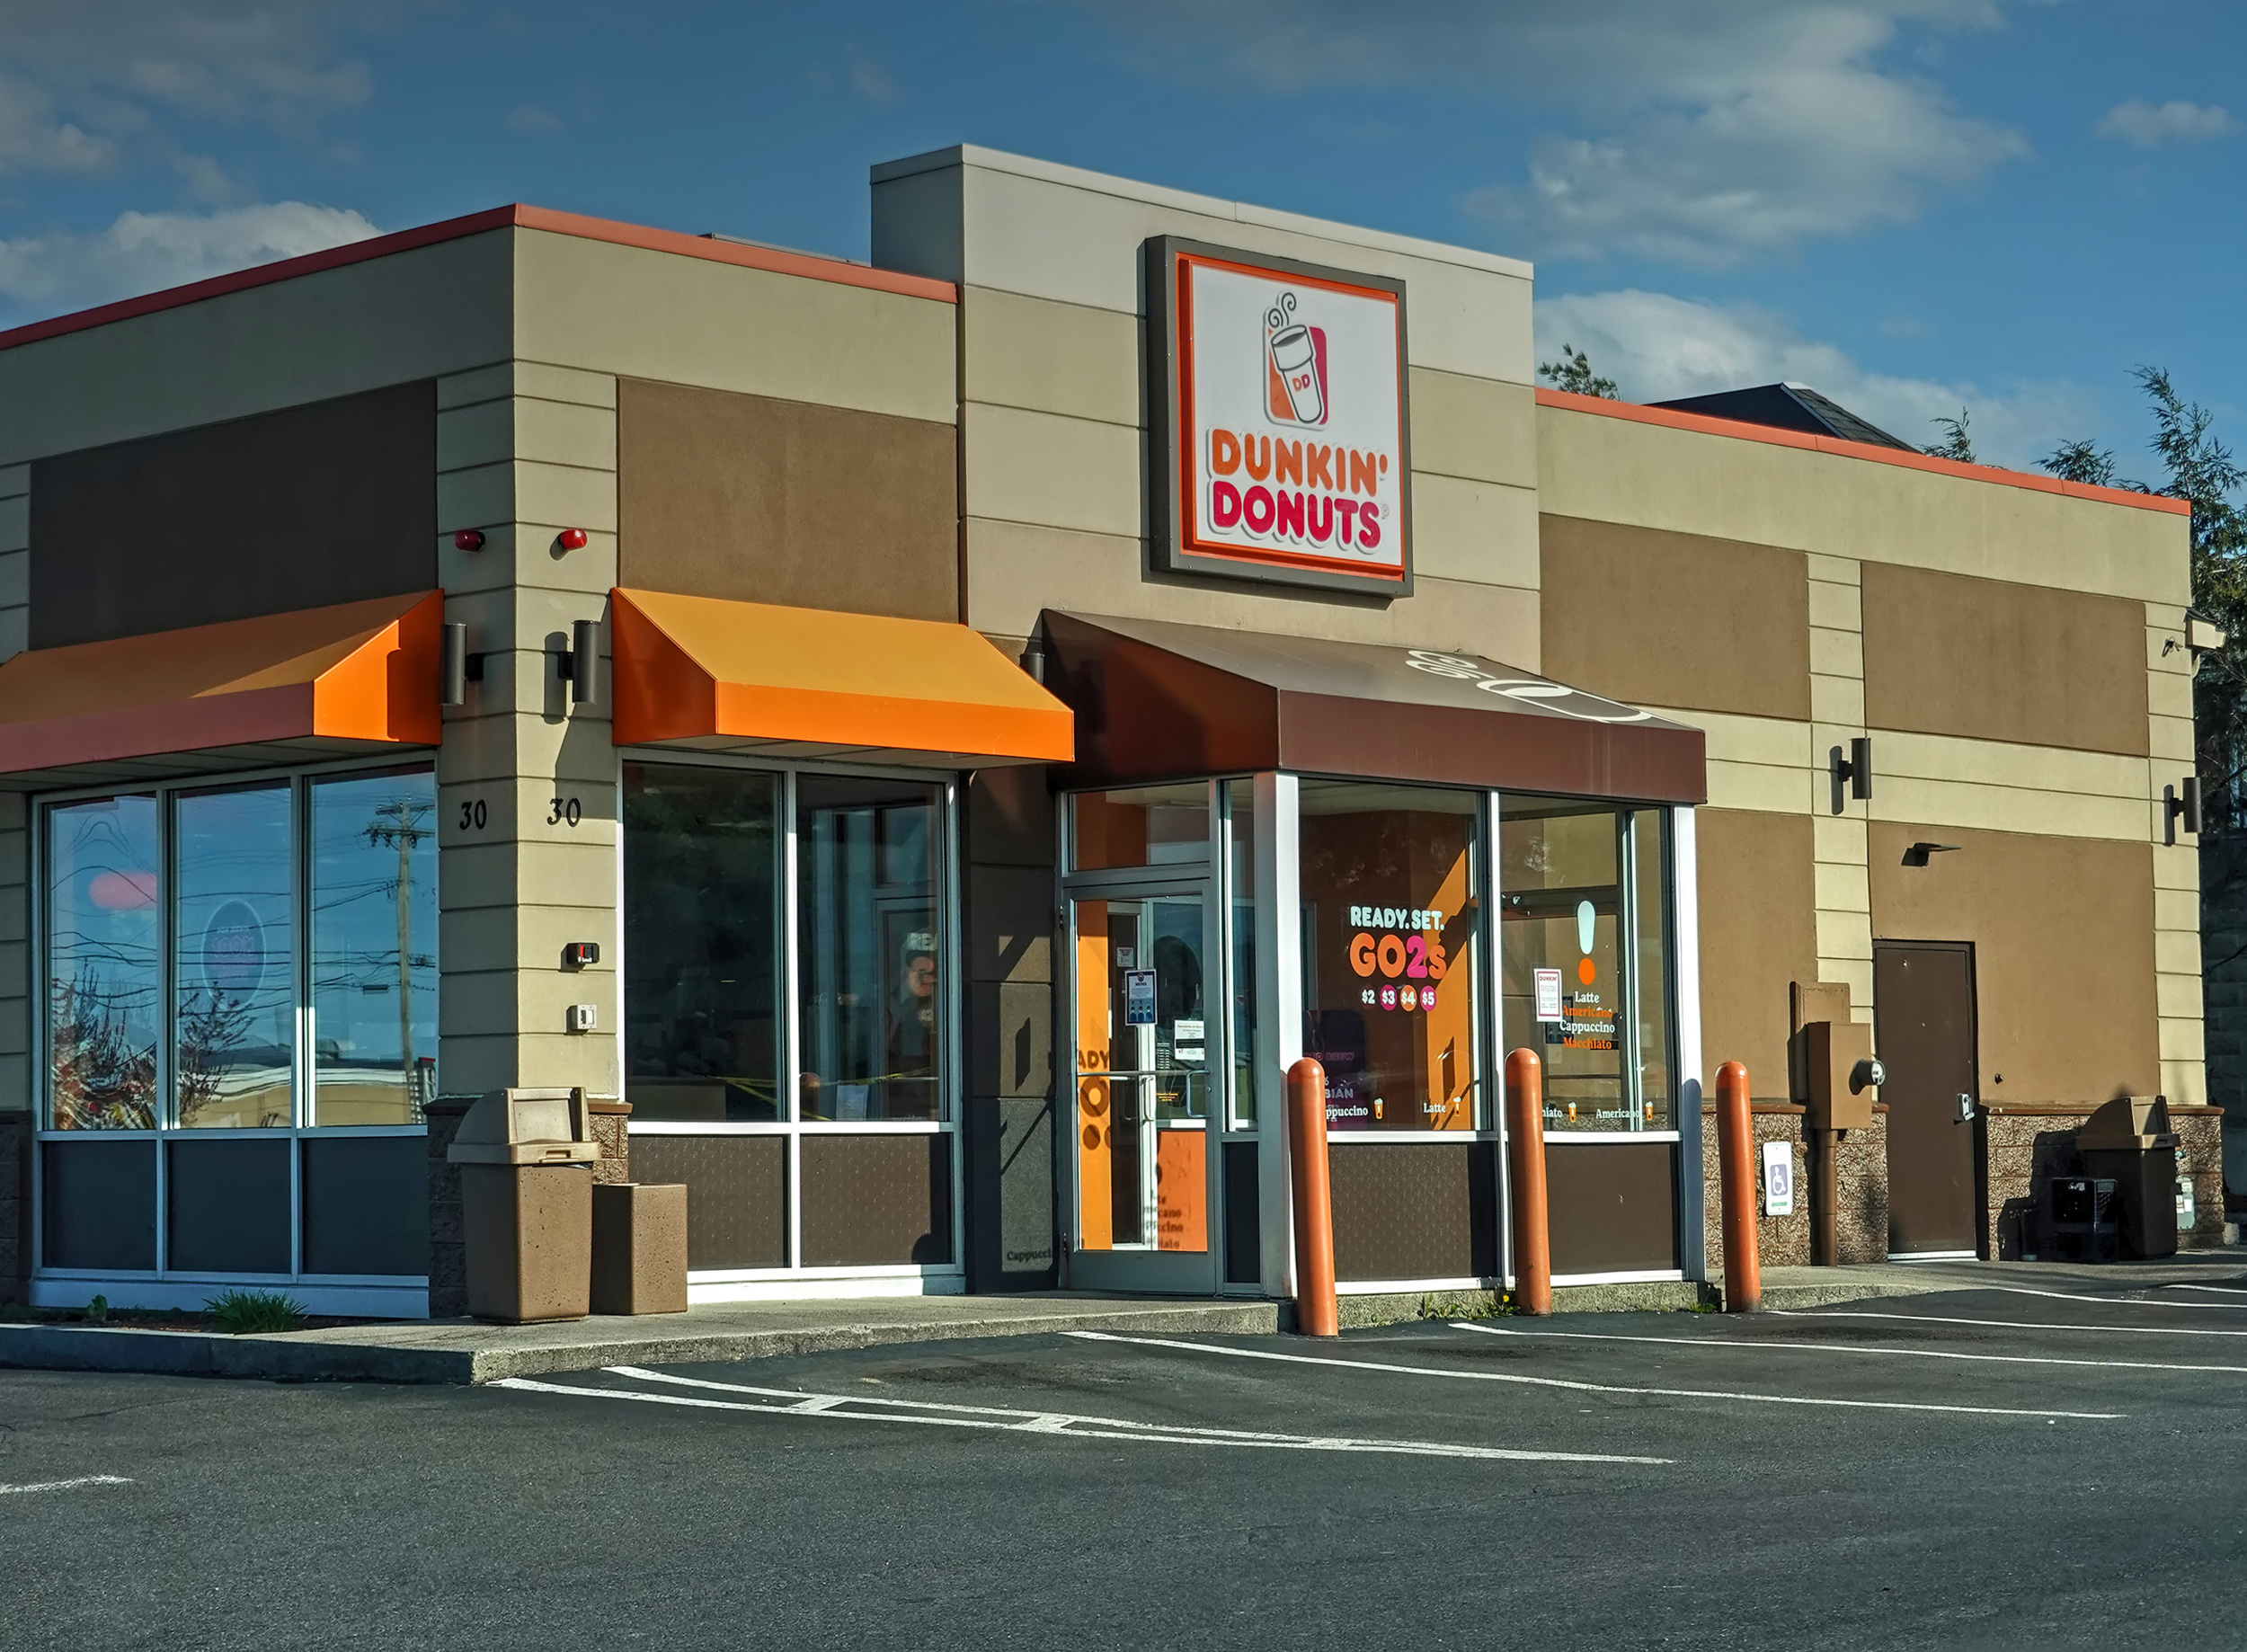 <p>With 1,100 locations in the relatively small state of Massachusetts, you can’t go very far without passing a Dunkin’. People who have been to Boston will tell you there’s one every few blocks, but it’s the city of Revere that holds the distinction of having a Dunkin’ across the street from another Dunkin’. If you want to stop by and see this wonder of the world, the stores are located at 30 Squire Road (<span><em>pictured</em></span>) and 35 Squire Road.</p><p><a href='https://www.msn.com/en-us/community/channel/vid-cj9pqbr0vn9in2b6ddcd8sfgpfq6x6utp44fssrv6mc2gtybw0us'>Follow us on MSN to see more of our exclusive lifestyle content.</a></p>